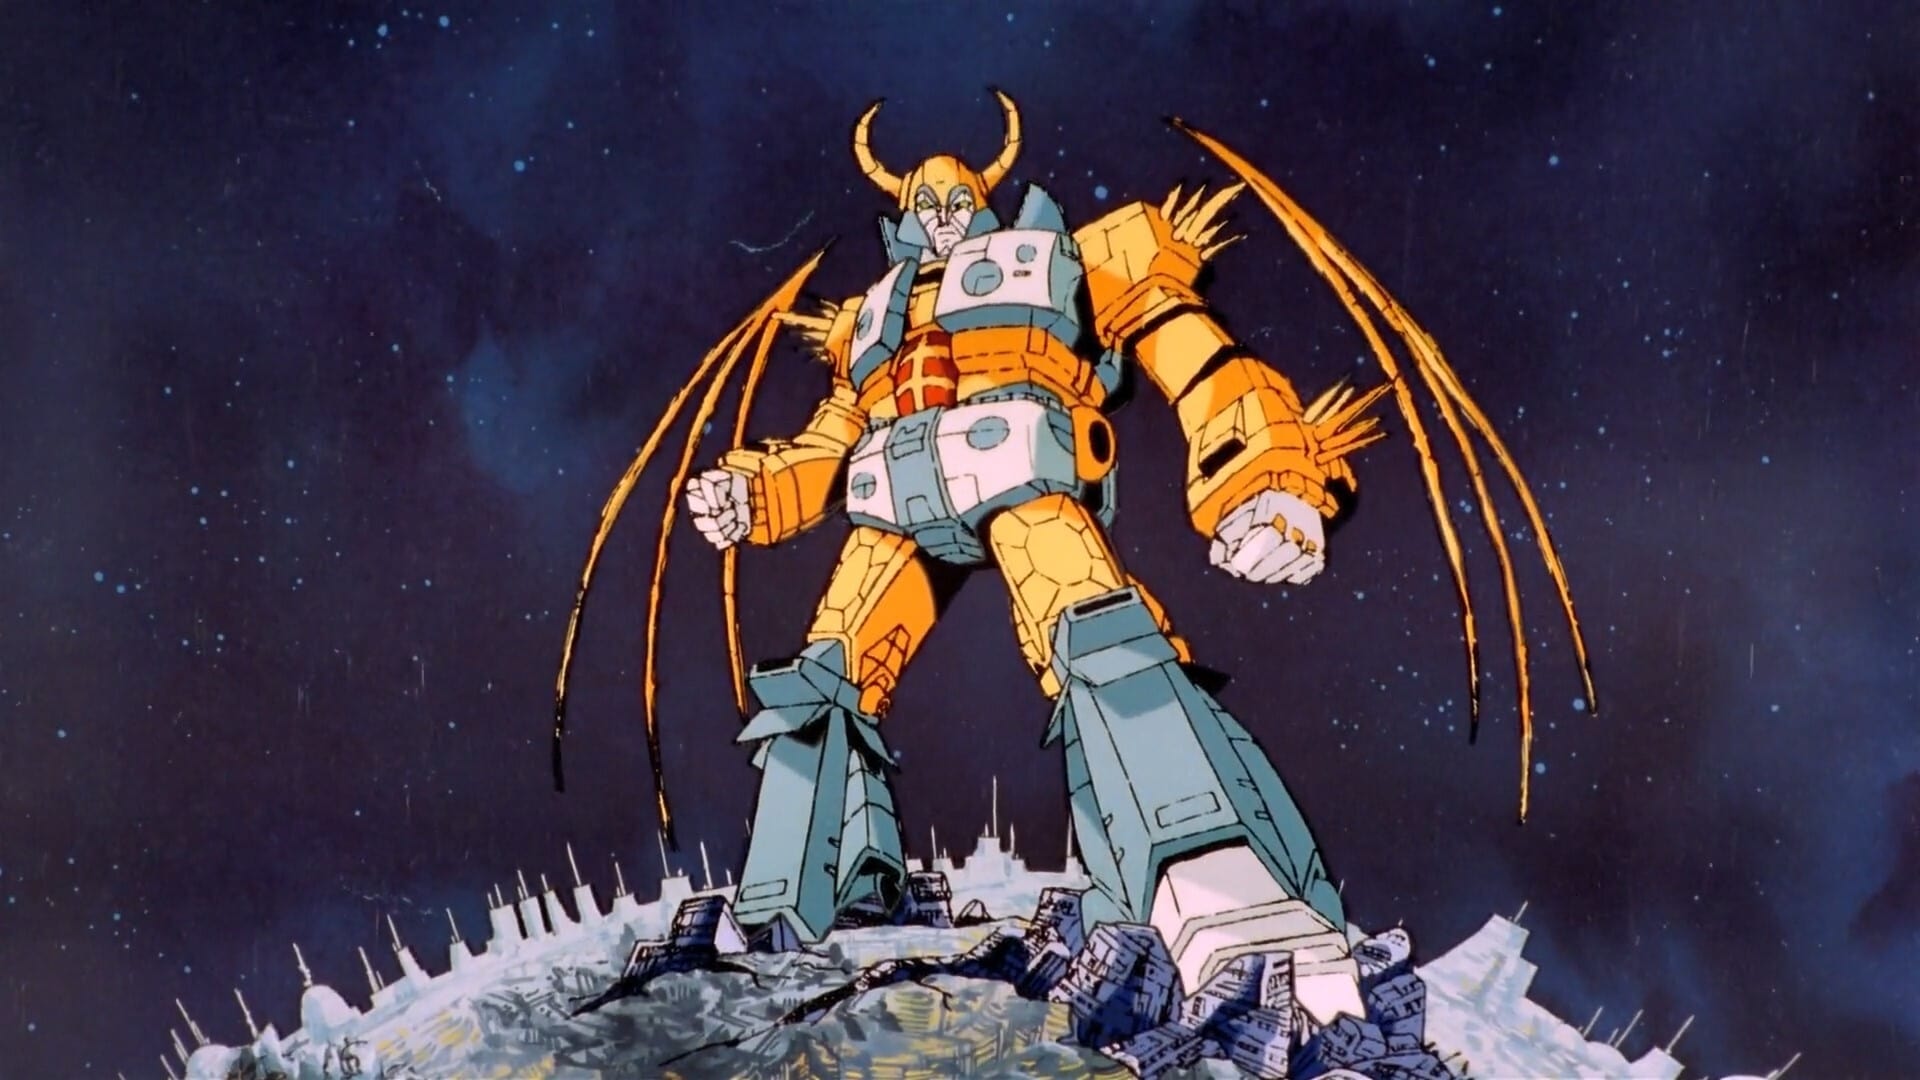 The Transformers: The Movie (1986)